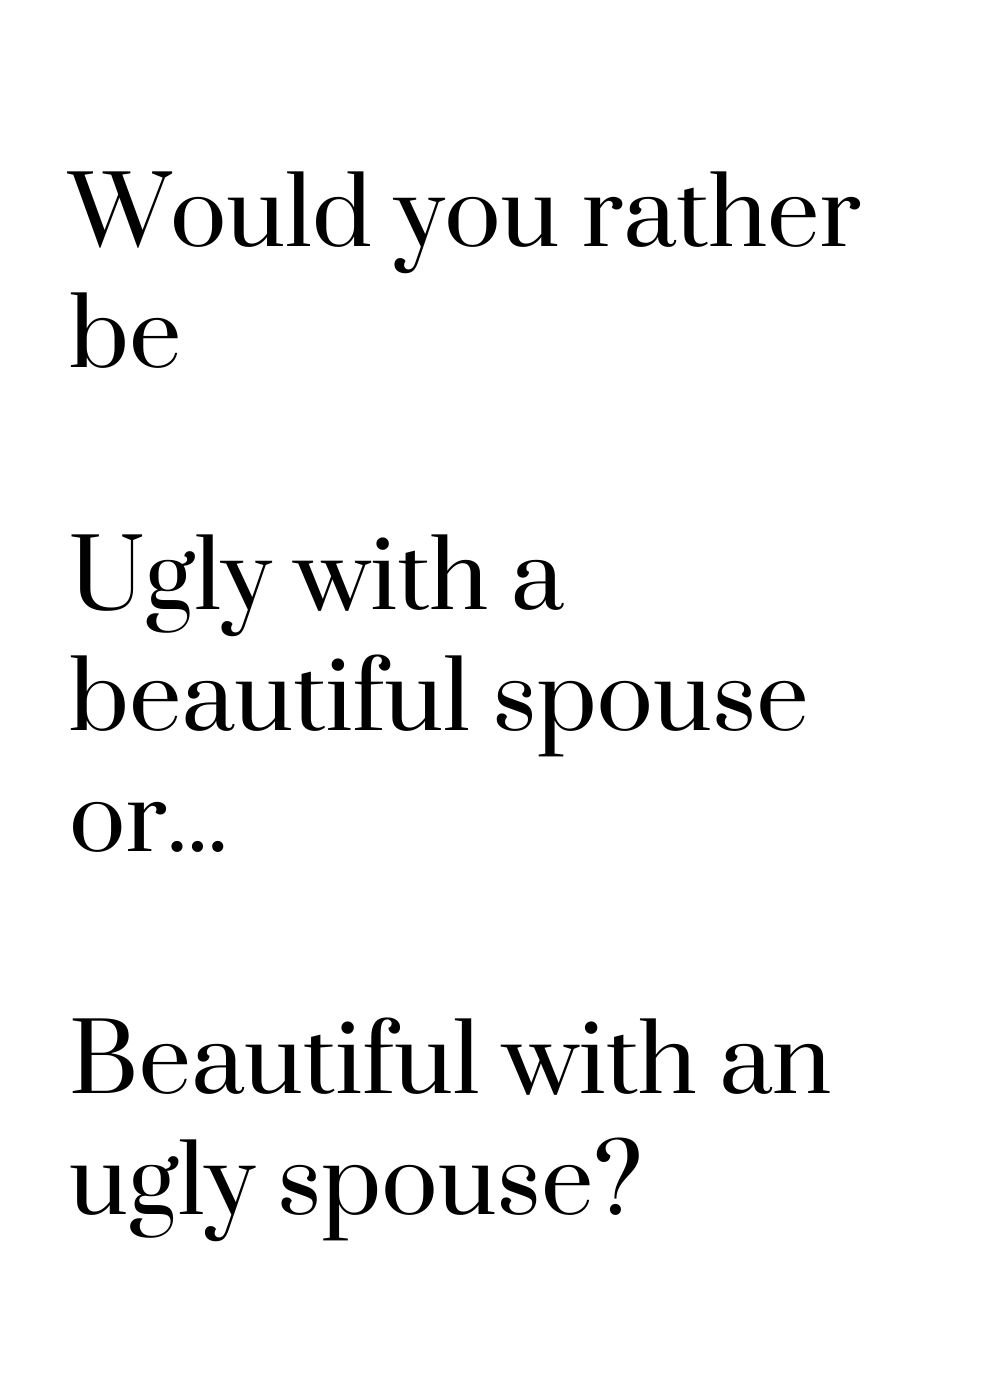 would you rather be ugle with a beautiful spouse or beautiful with an ugly spouse